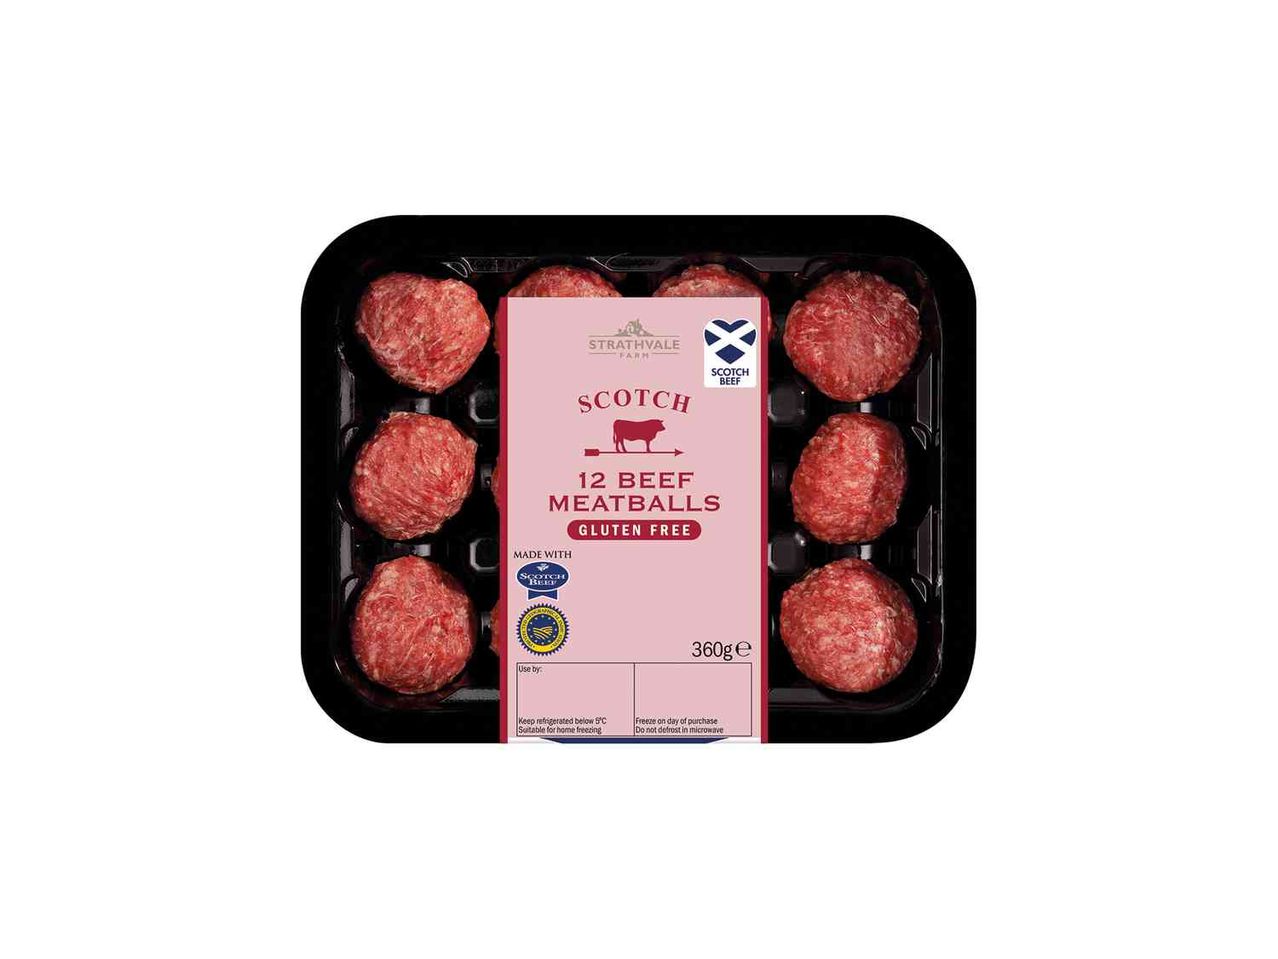 Go to full screen view: Strathvale Farm 12 Scotch Beef Meatballs - Image 1